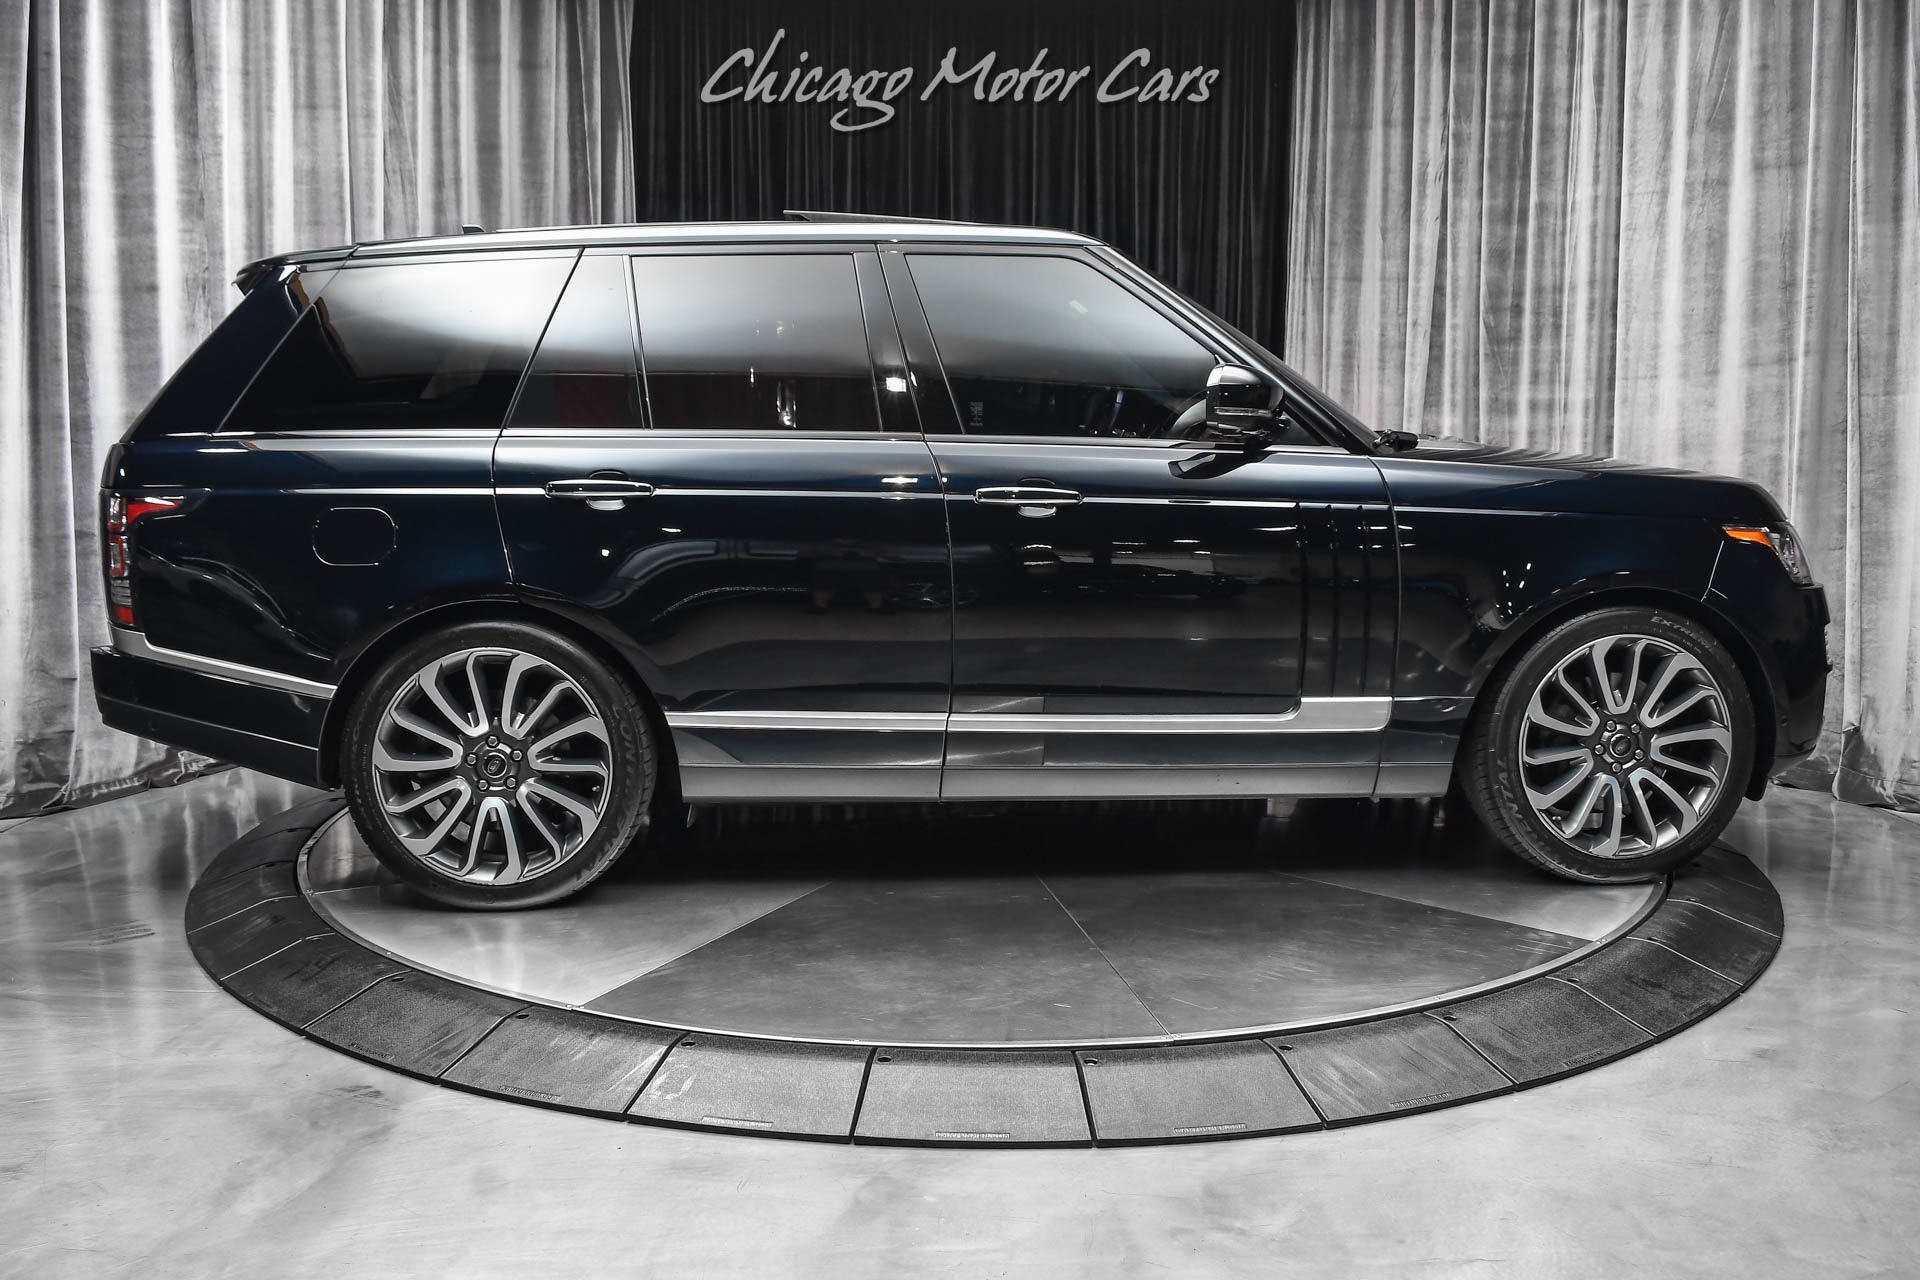 Used-2016-Land-Rover-Range-Rover-Autobiography-SUV-RARE---HOT-Color-Combo-707-Style-Wheels-Stunning